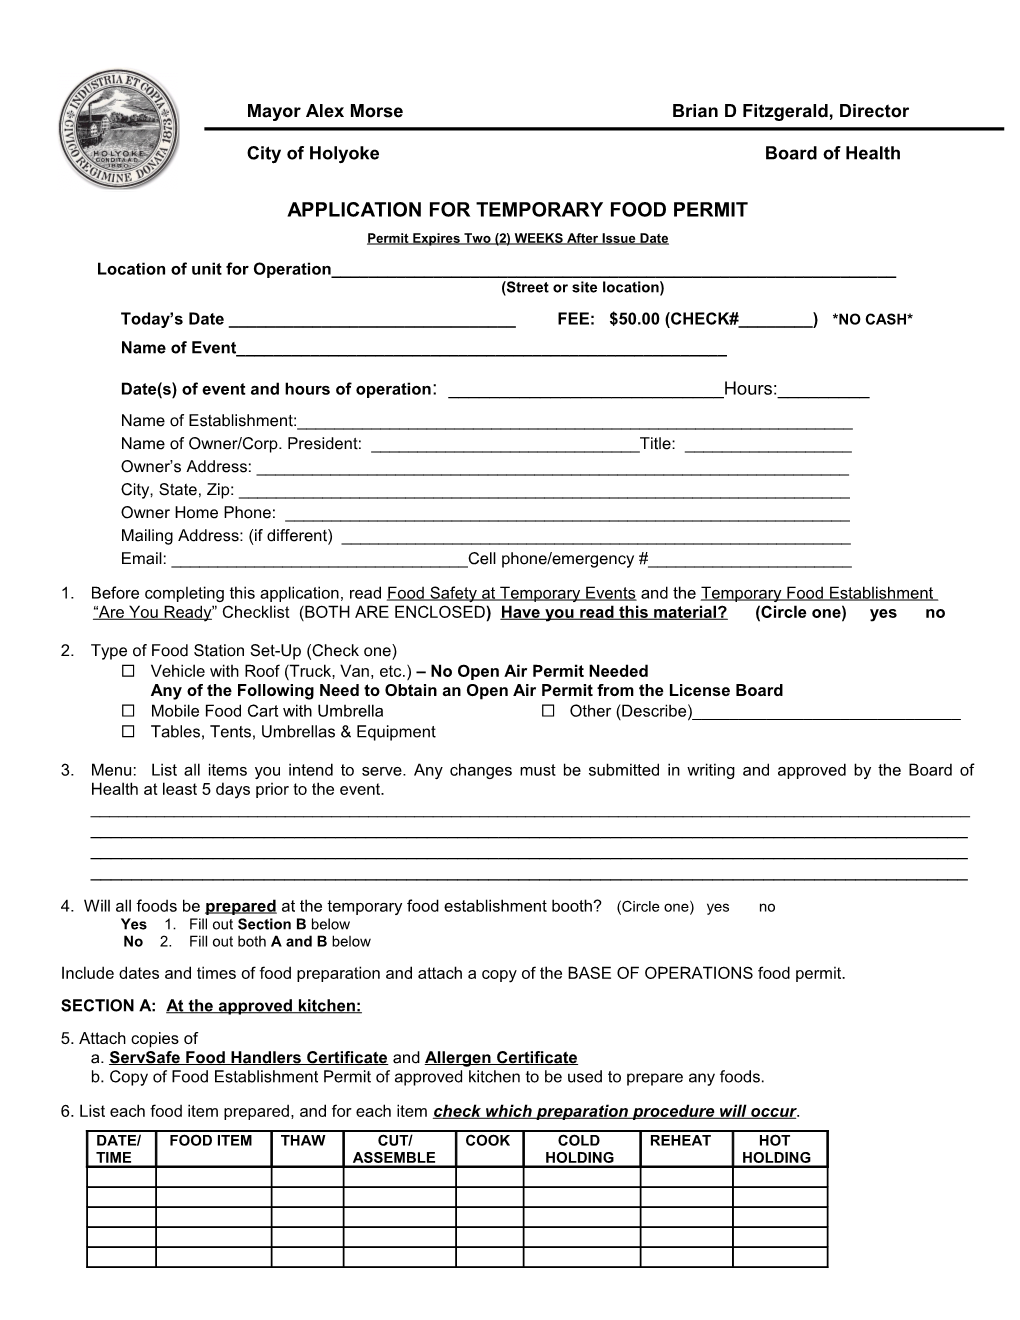 Application for Temporary Permit